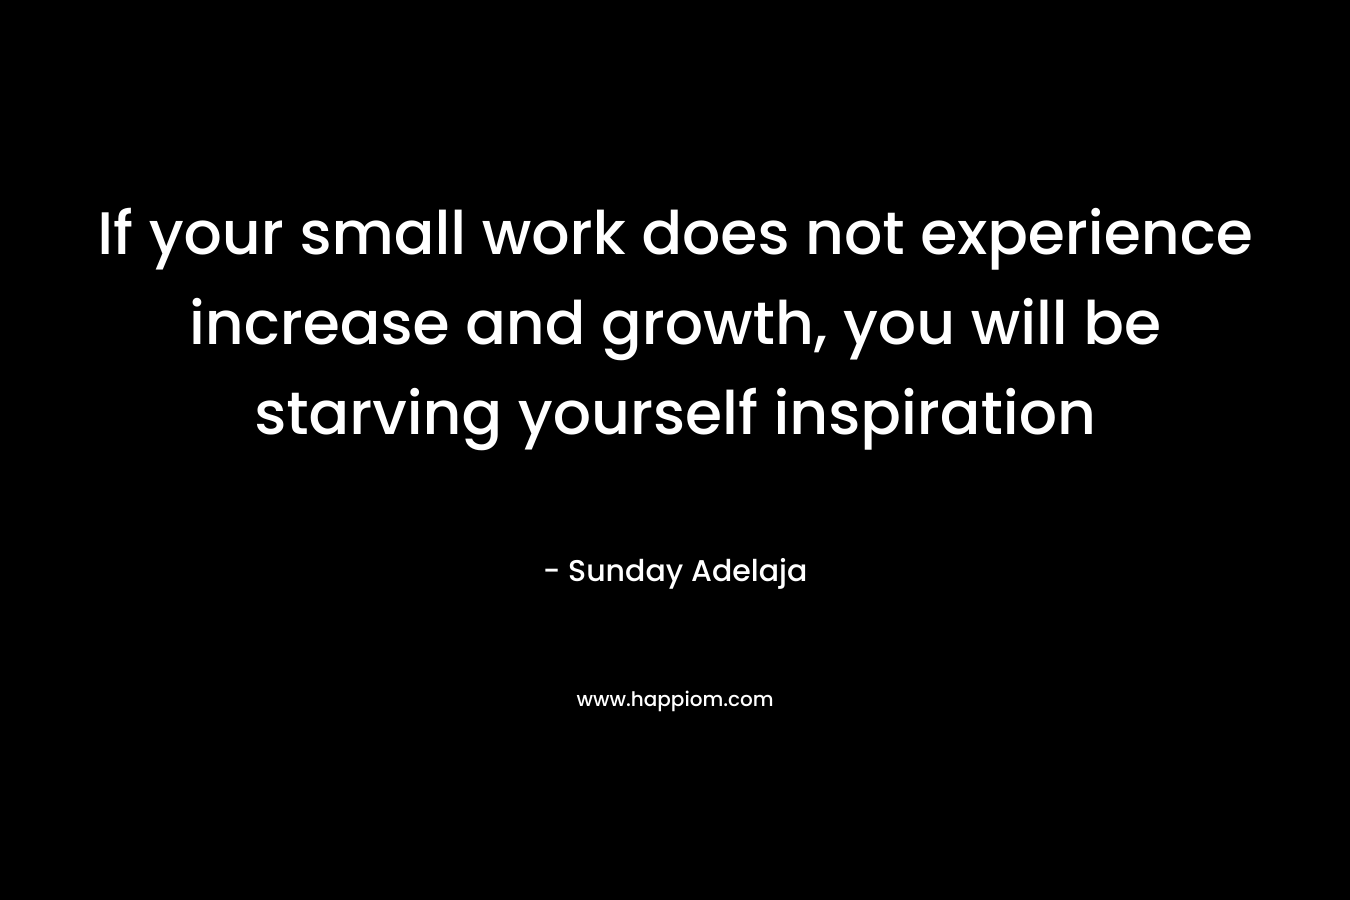 If your small work does not experience increase and growth, you will be starving yourself inspiration